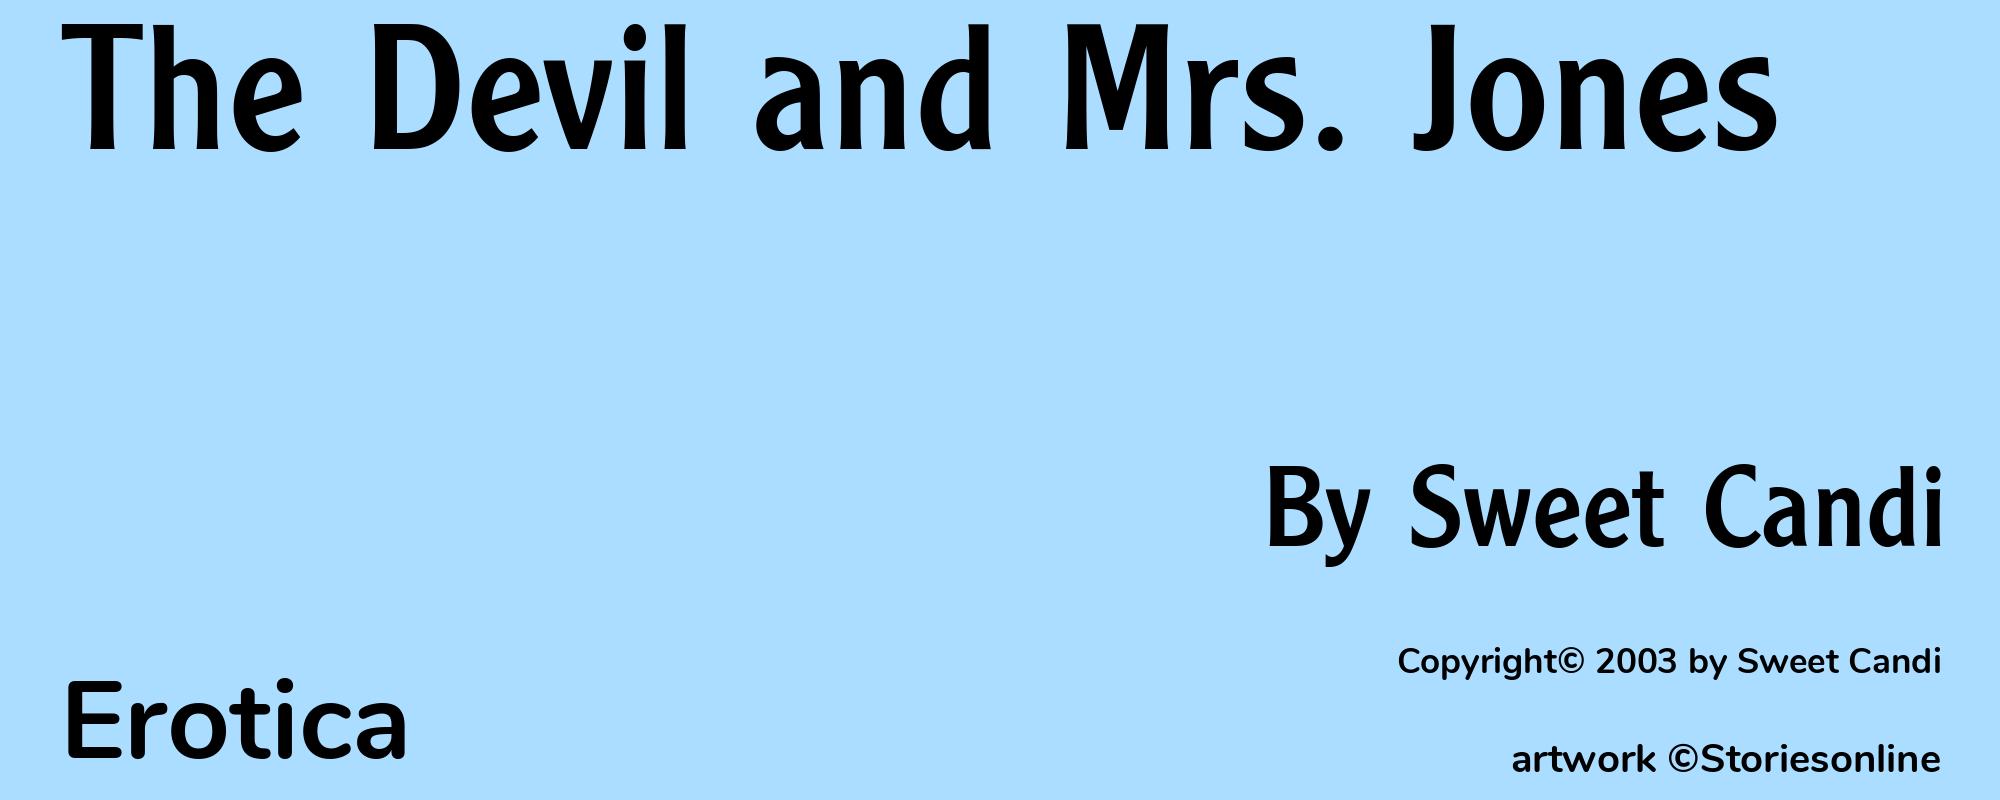 The Devil and Mrs. Jones - Cover